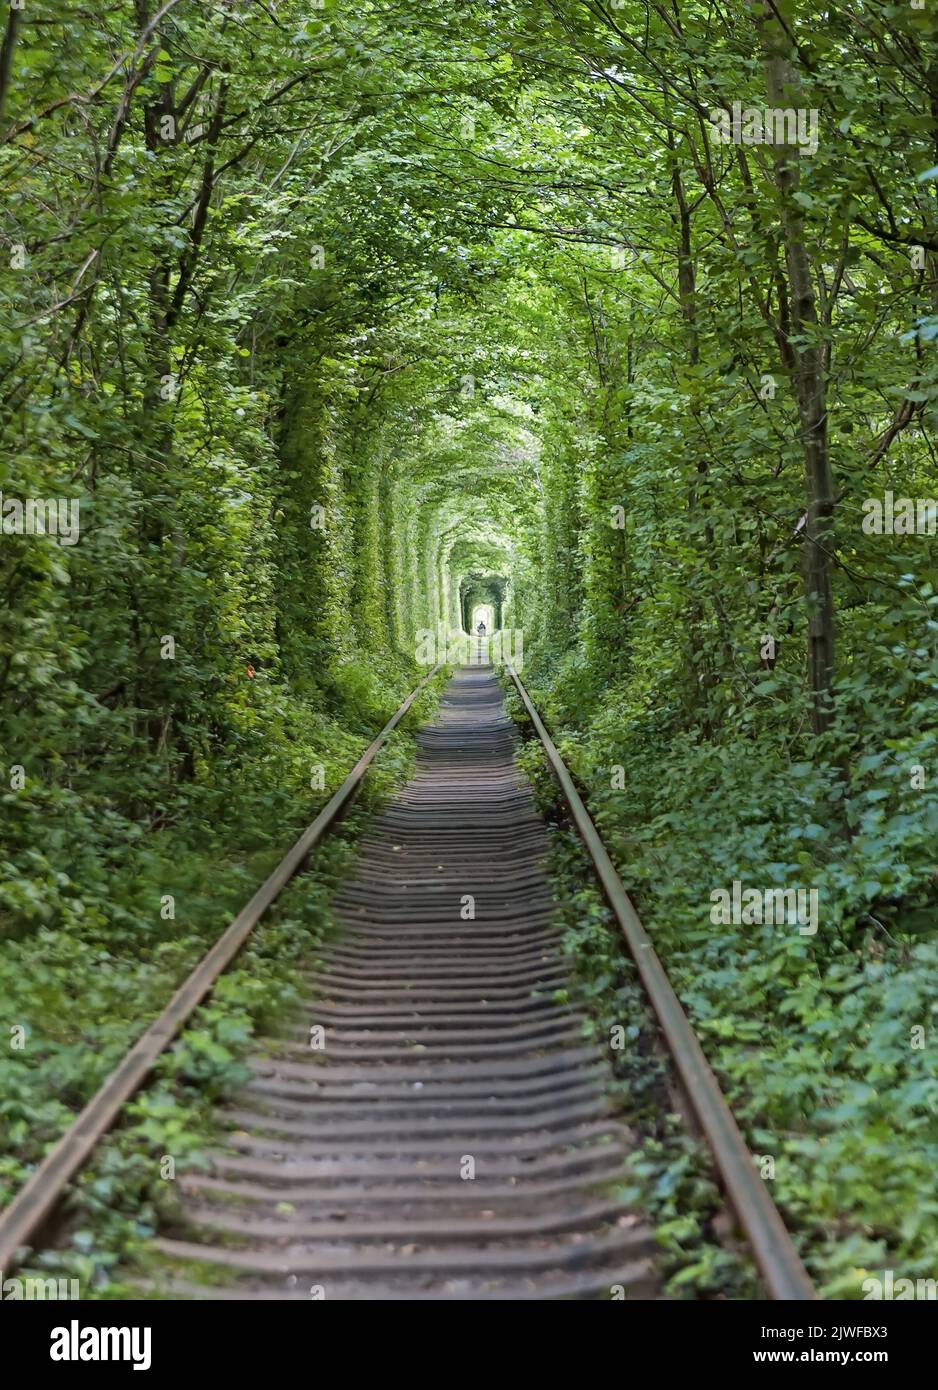 Tunnel of Love, a section of industrial railway surrounded by green arches near Klevan, Ukraine. Stock Photo